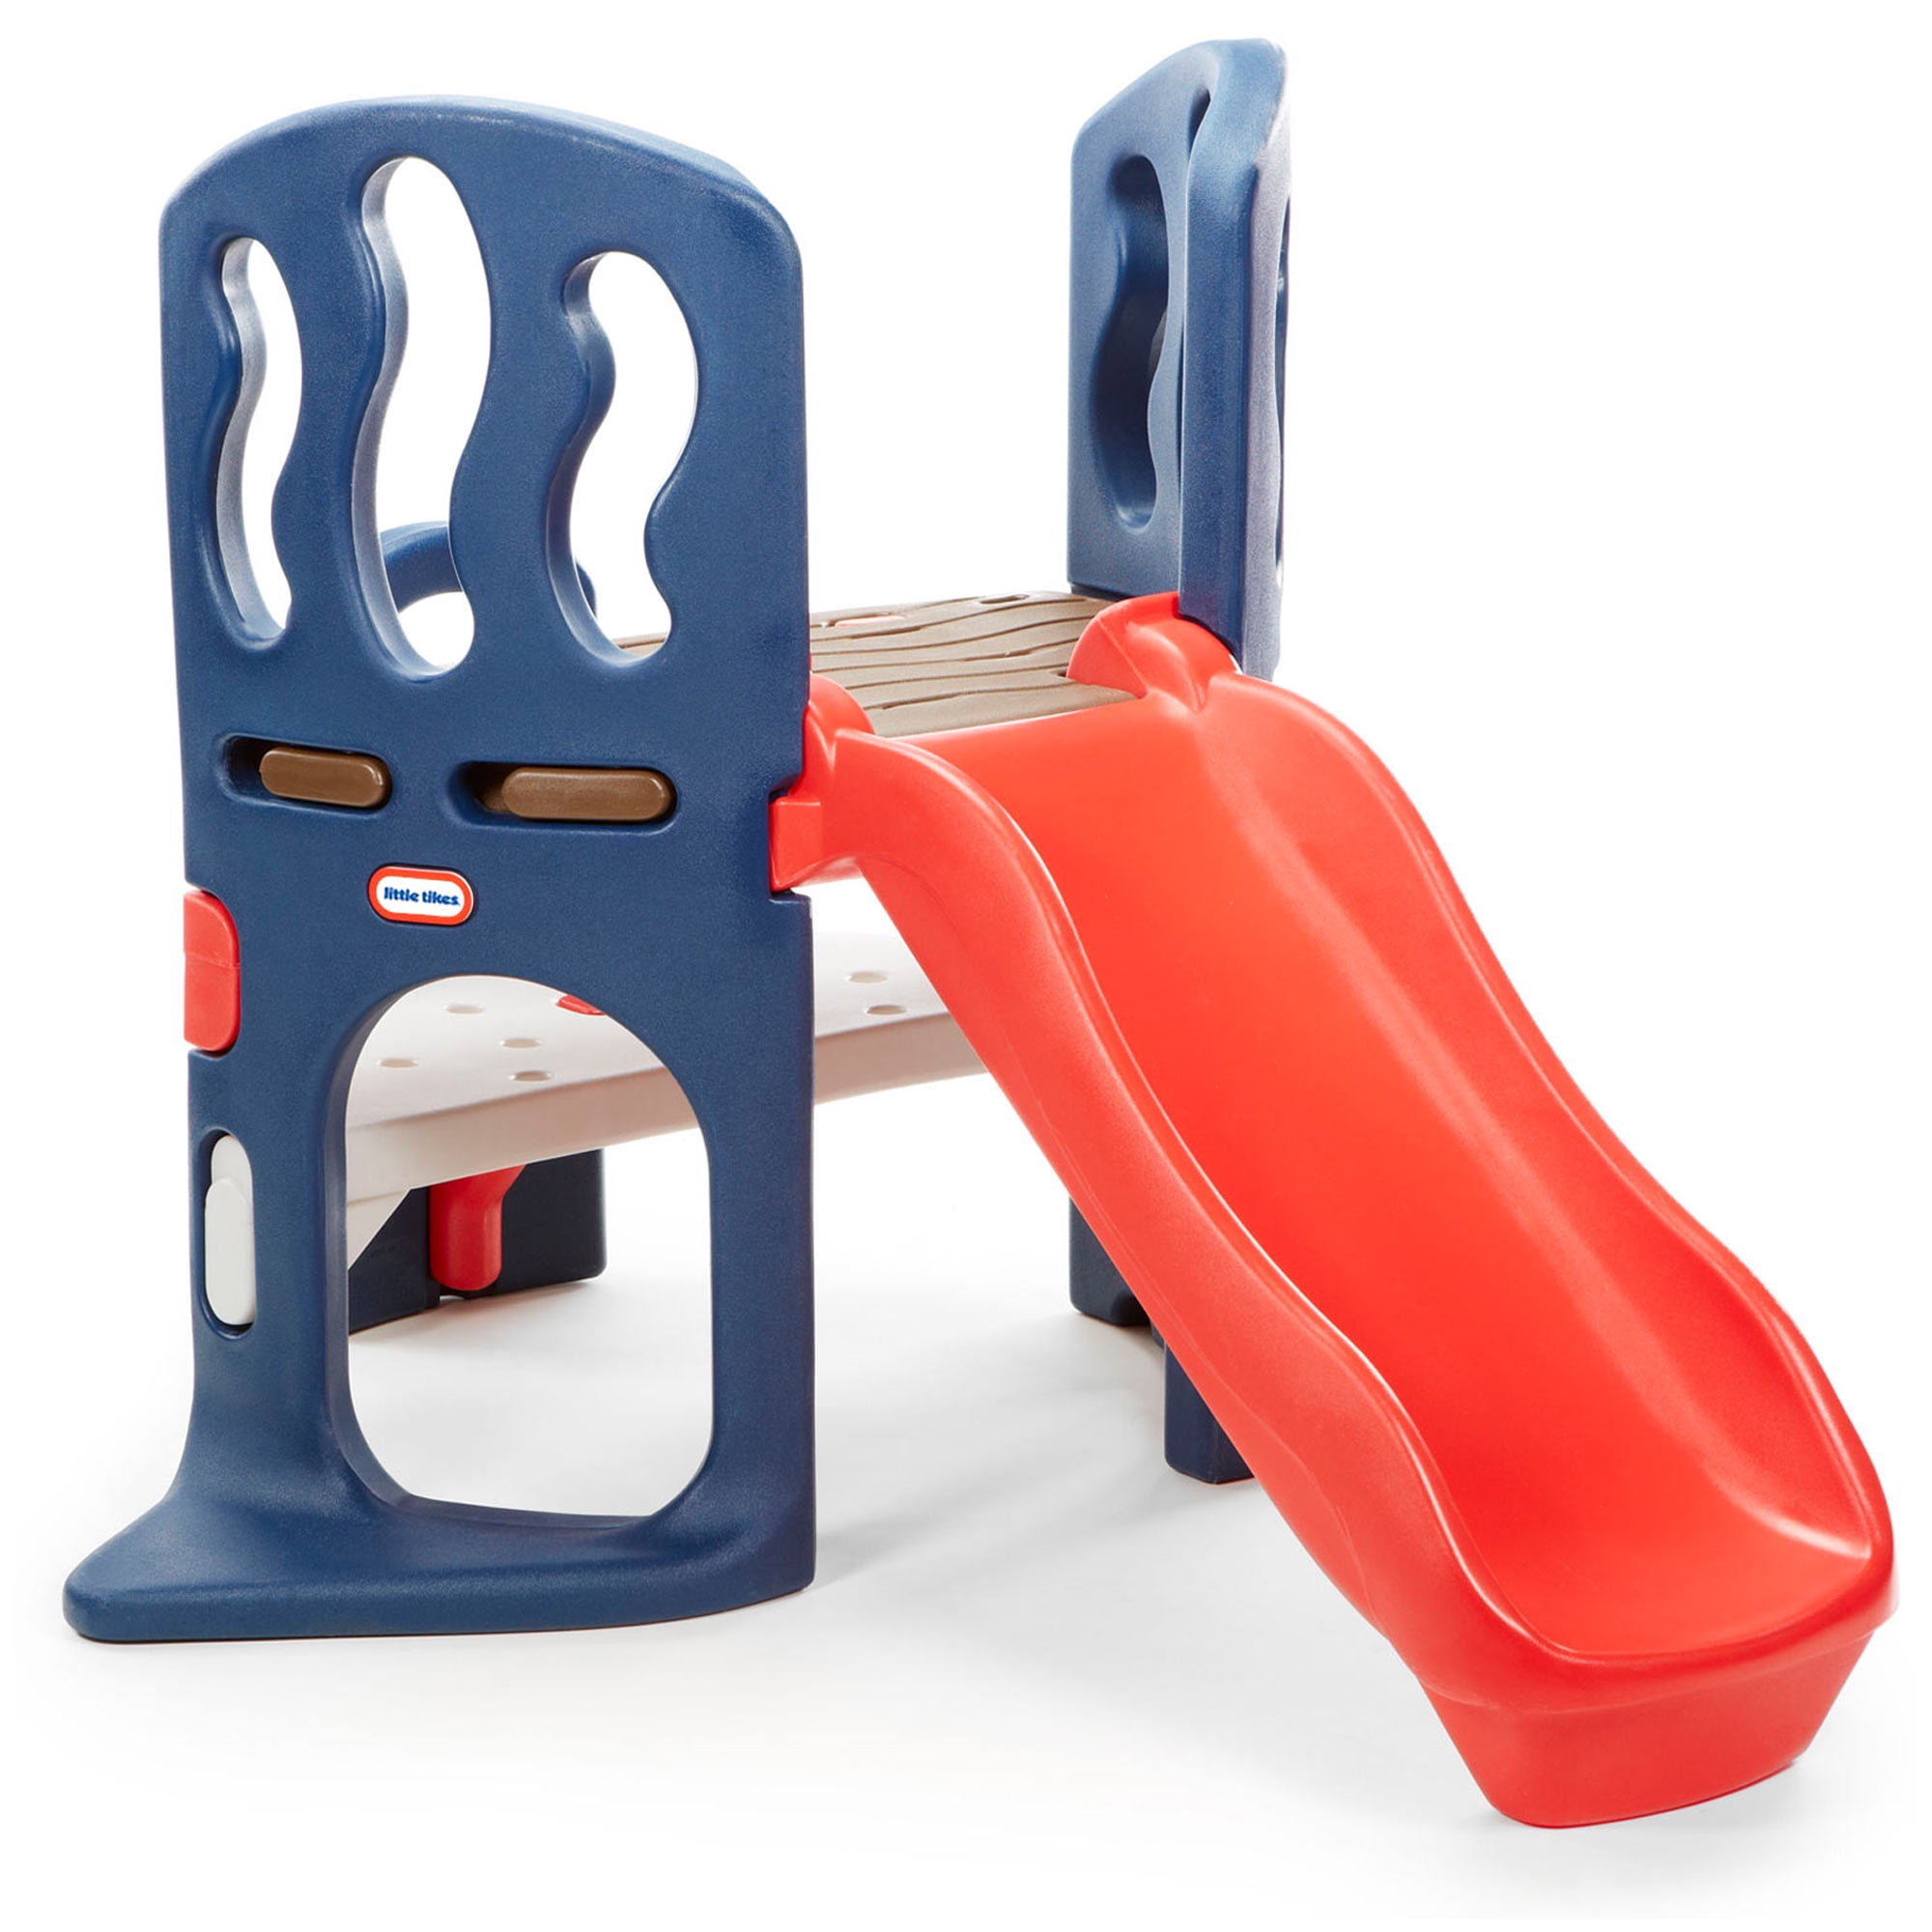 Little Tikes Hide & Slide Climber, Blue & Red - Climbing Toy and Slide for Kids Ages 2 to 6 - 2